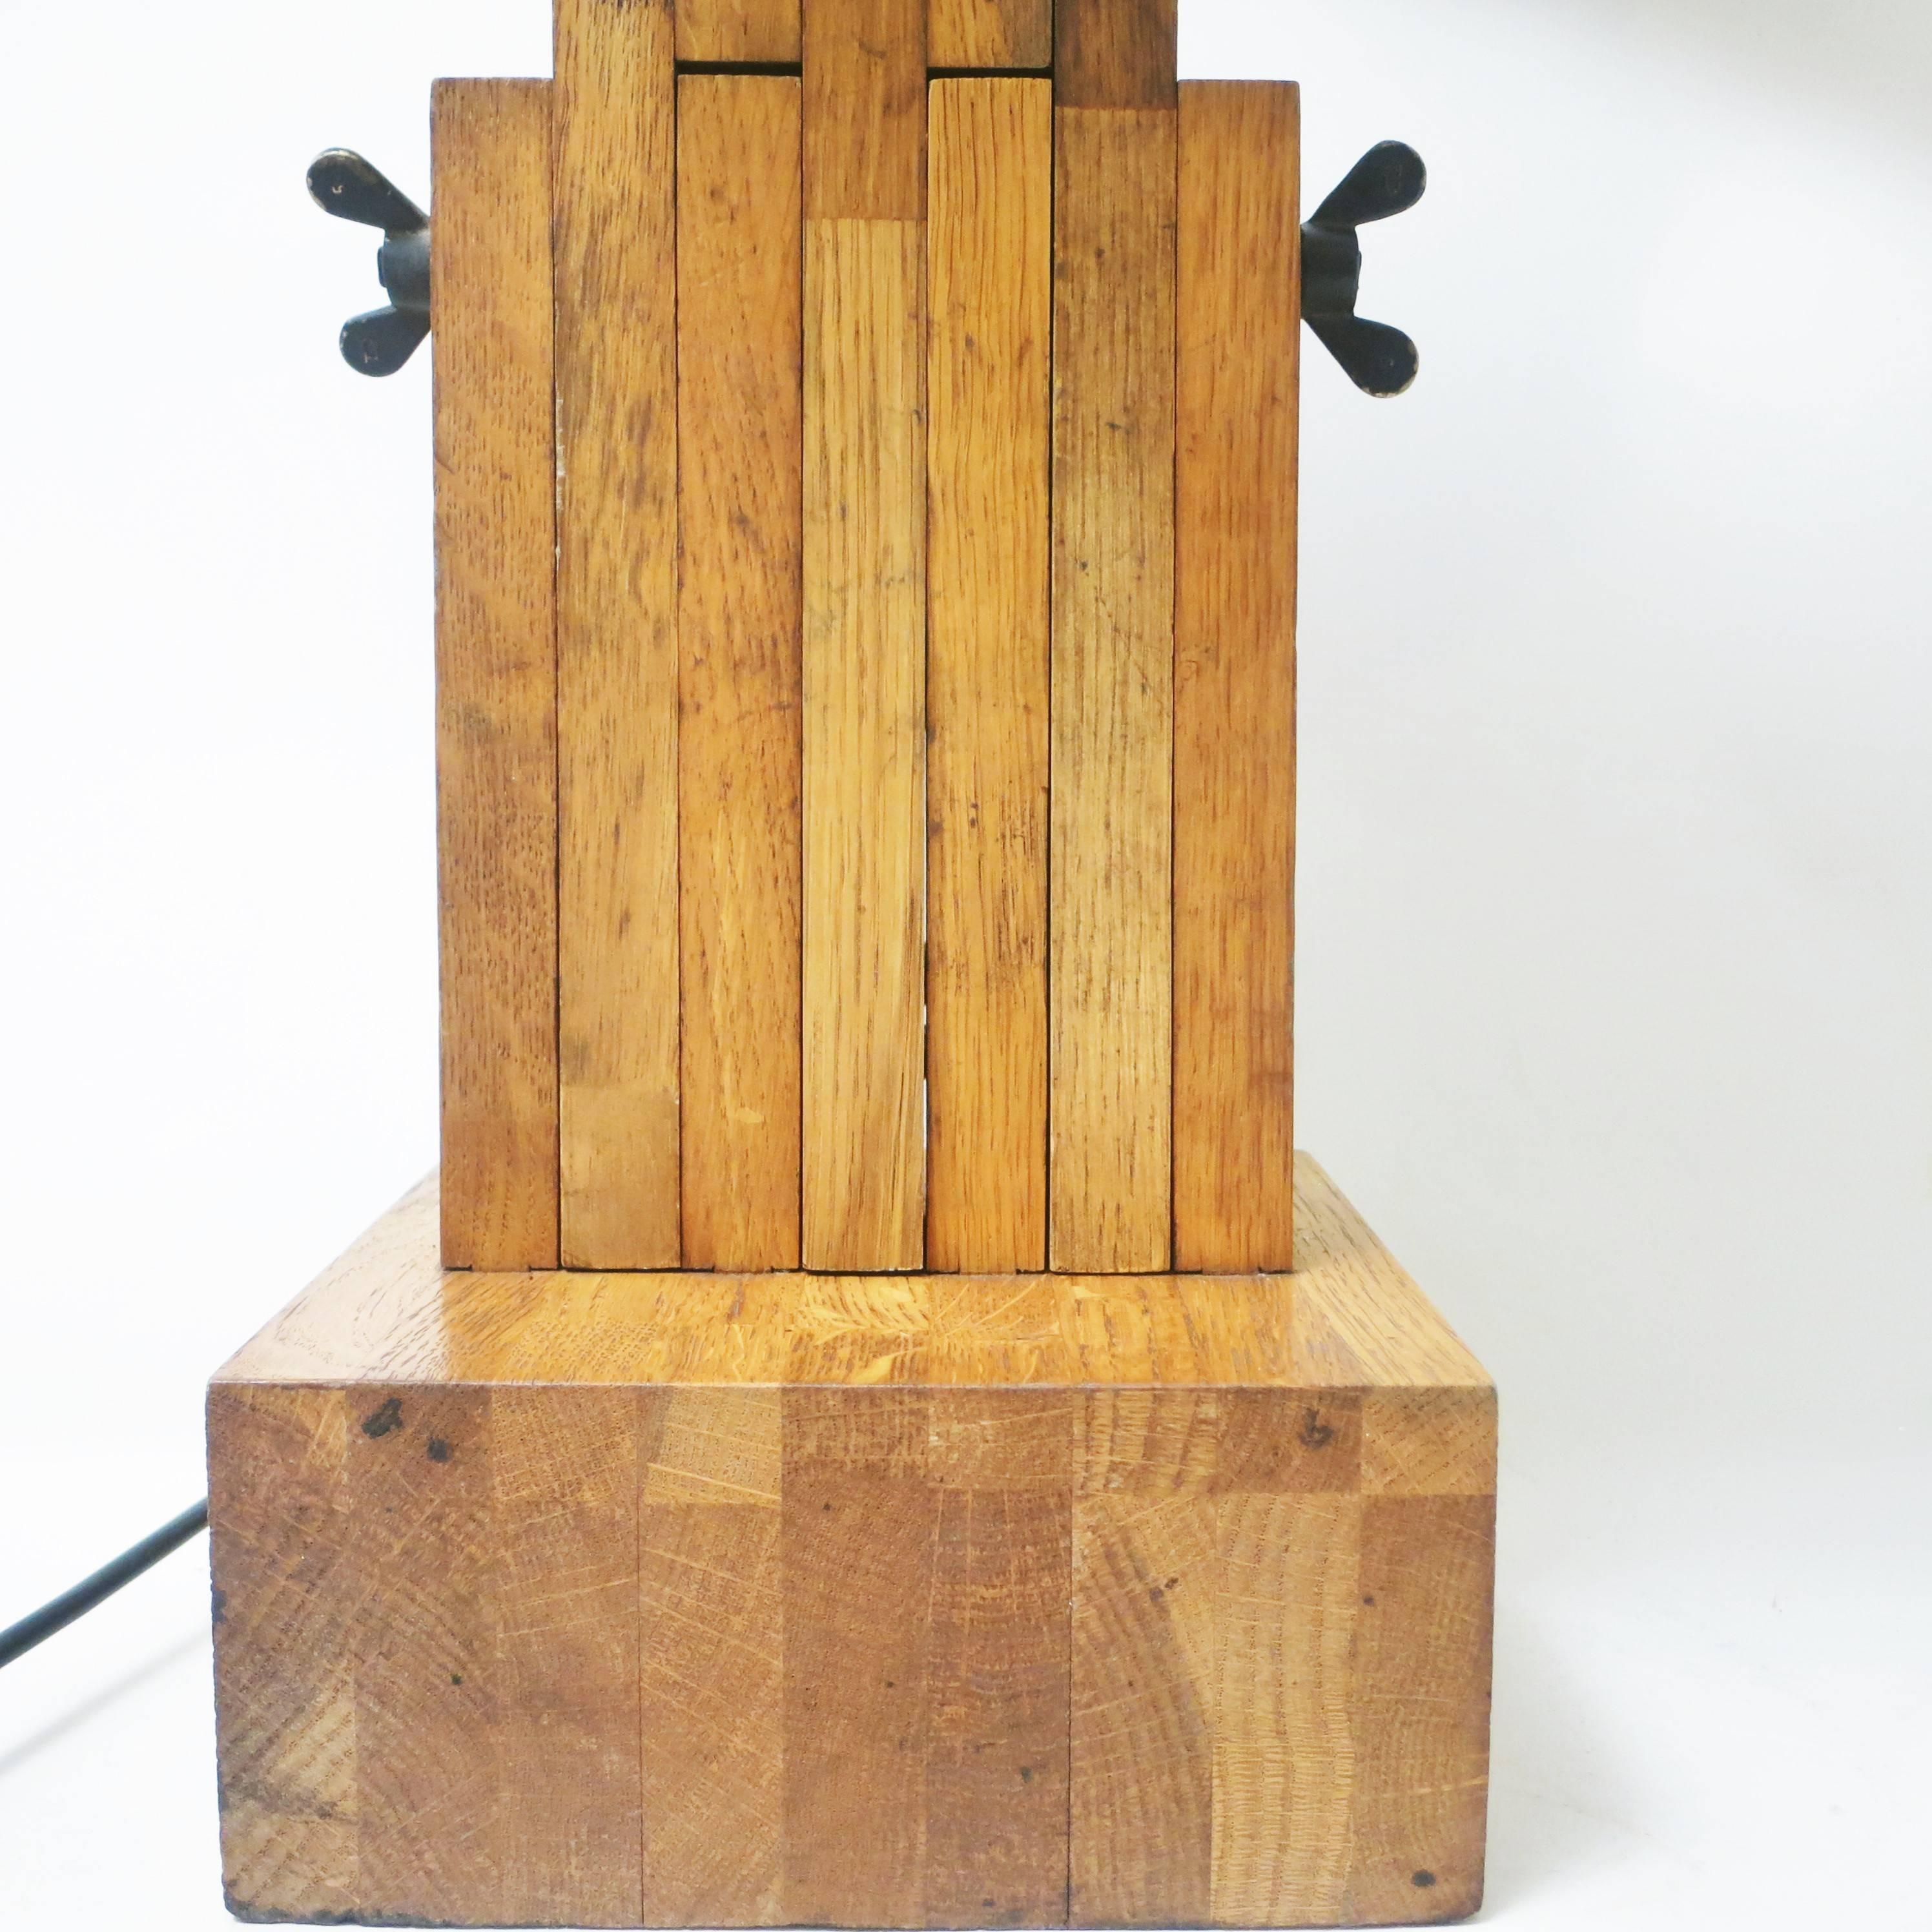 Joinery Daniel Pigeon Articulated Oak Lamp Le Chene Sauvage, 1980